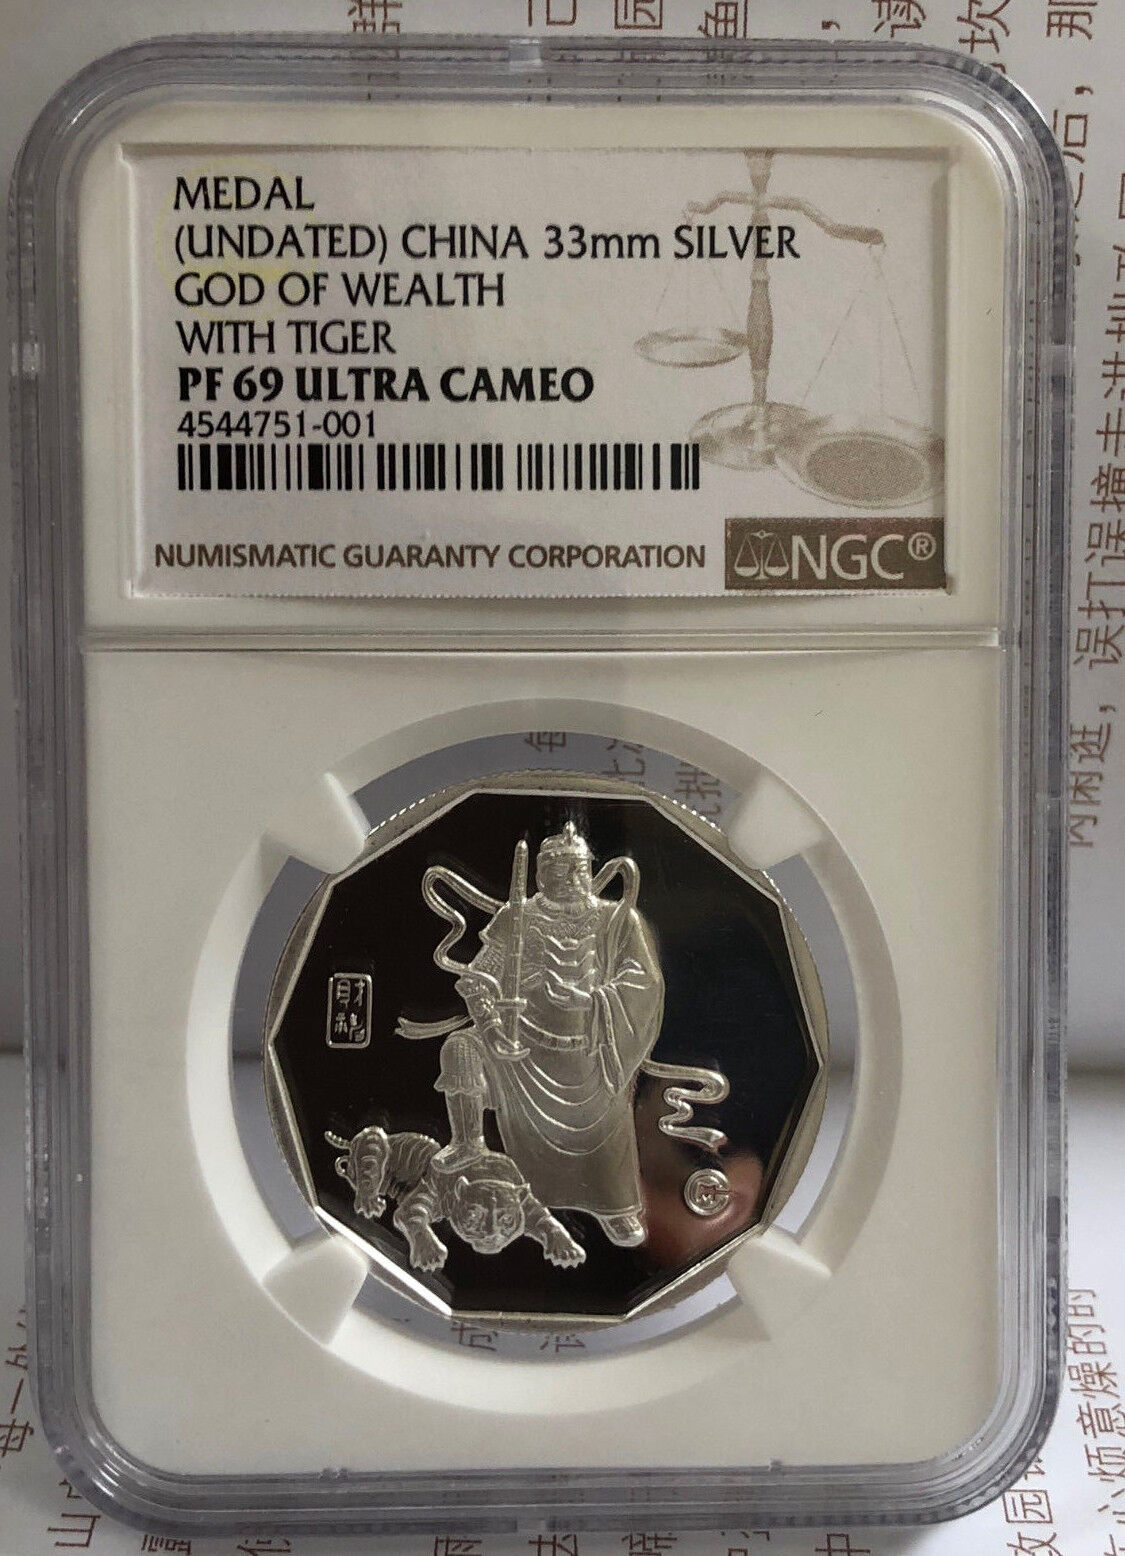 God Of Wealth - Official China Mint Silver Medal Ngc Pf69 Uc Sn:4544751-001